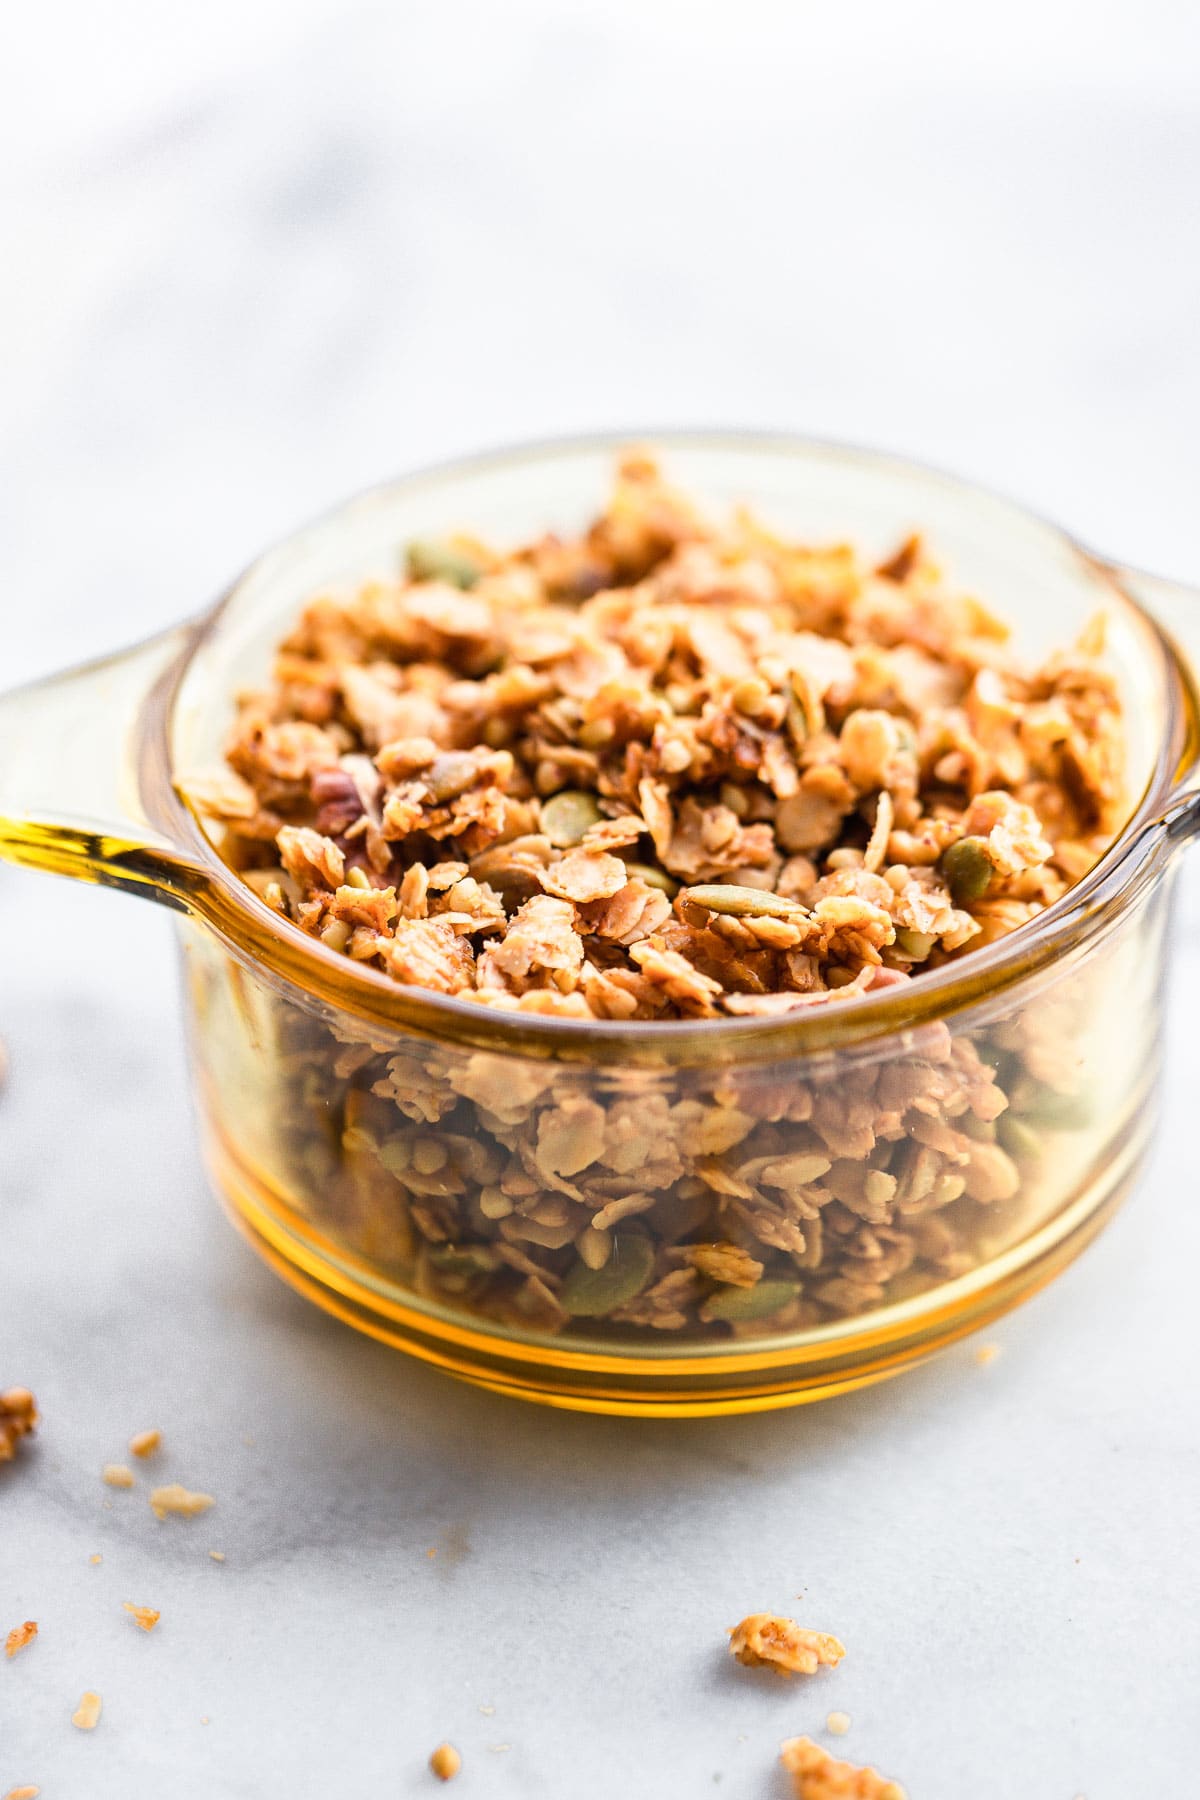 Homemade Maple Buckwheat Granola with pepita seeds in a clear brown bowl